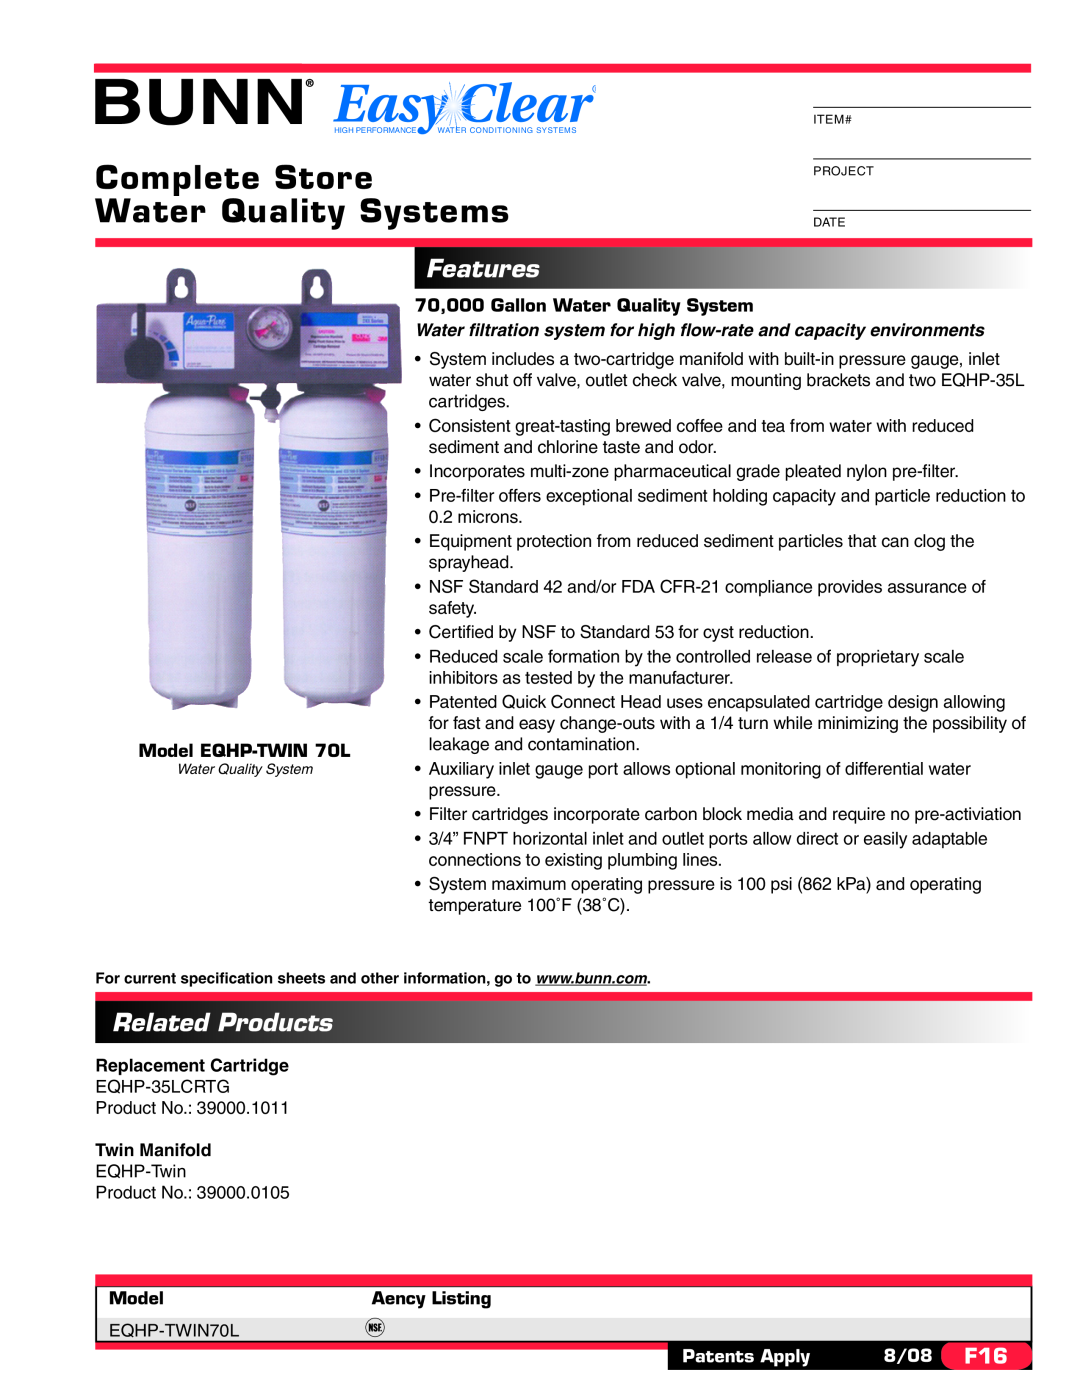 Bunn specifications Complete Store, Water Quality Systems, Features, Related Products, Model EQHP-TWIN 70L, 8/08 F16 